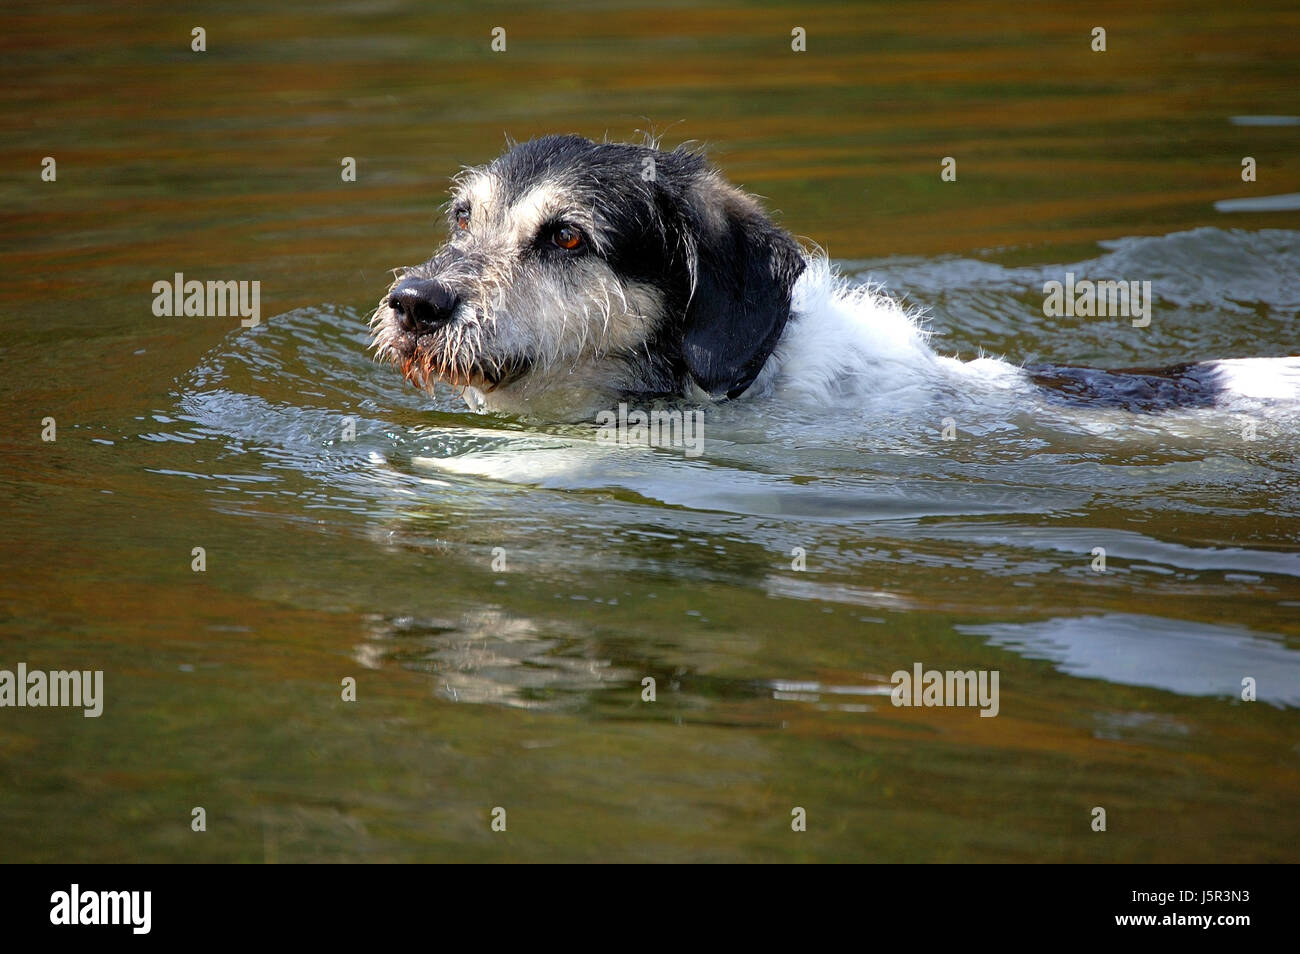 Animaux Animaux Animaux chien chiens Natation Natation Natation Natation l'eau pour faire le Banque D'Images